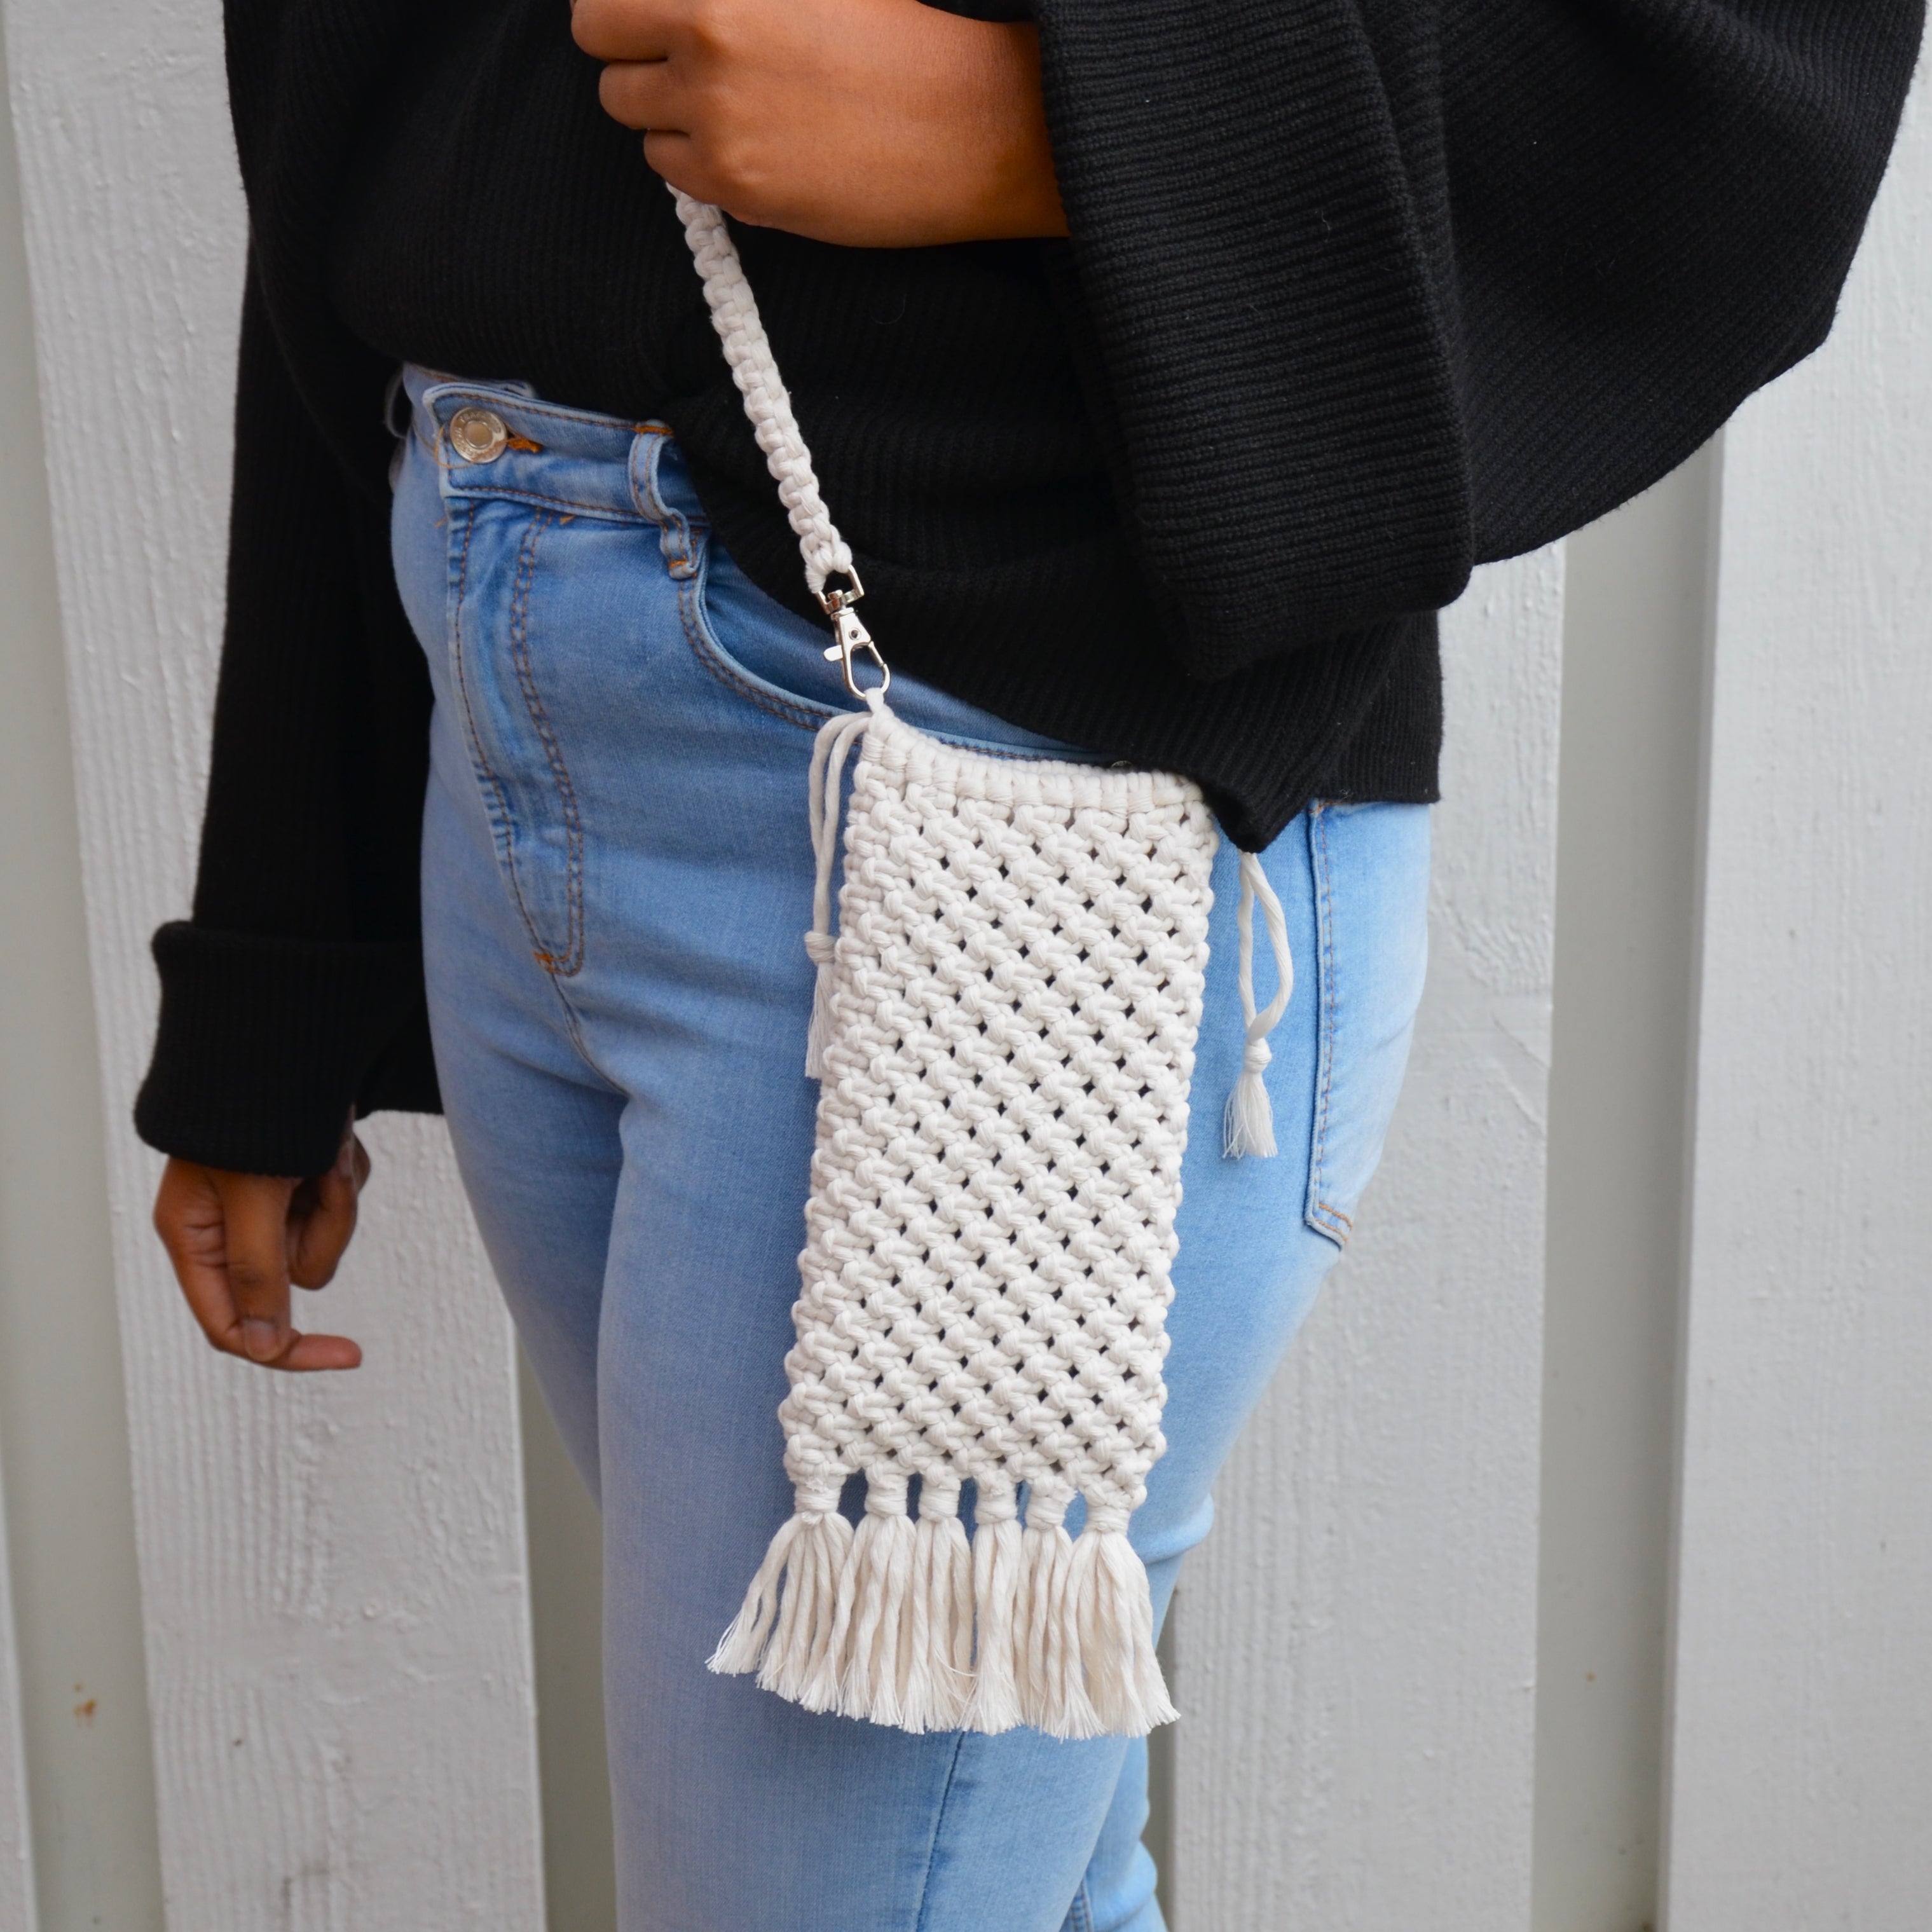 A woman carrying a white macrame mobile phone bag with fringe detailing and a shoulder strap